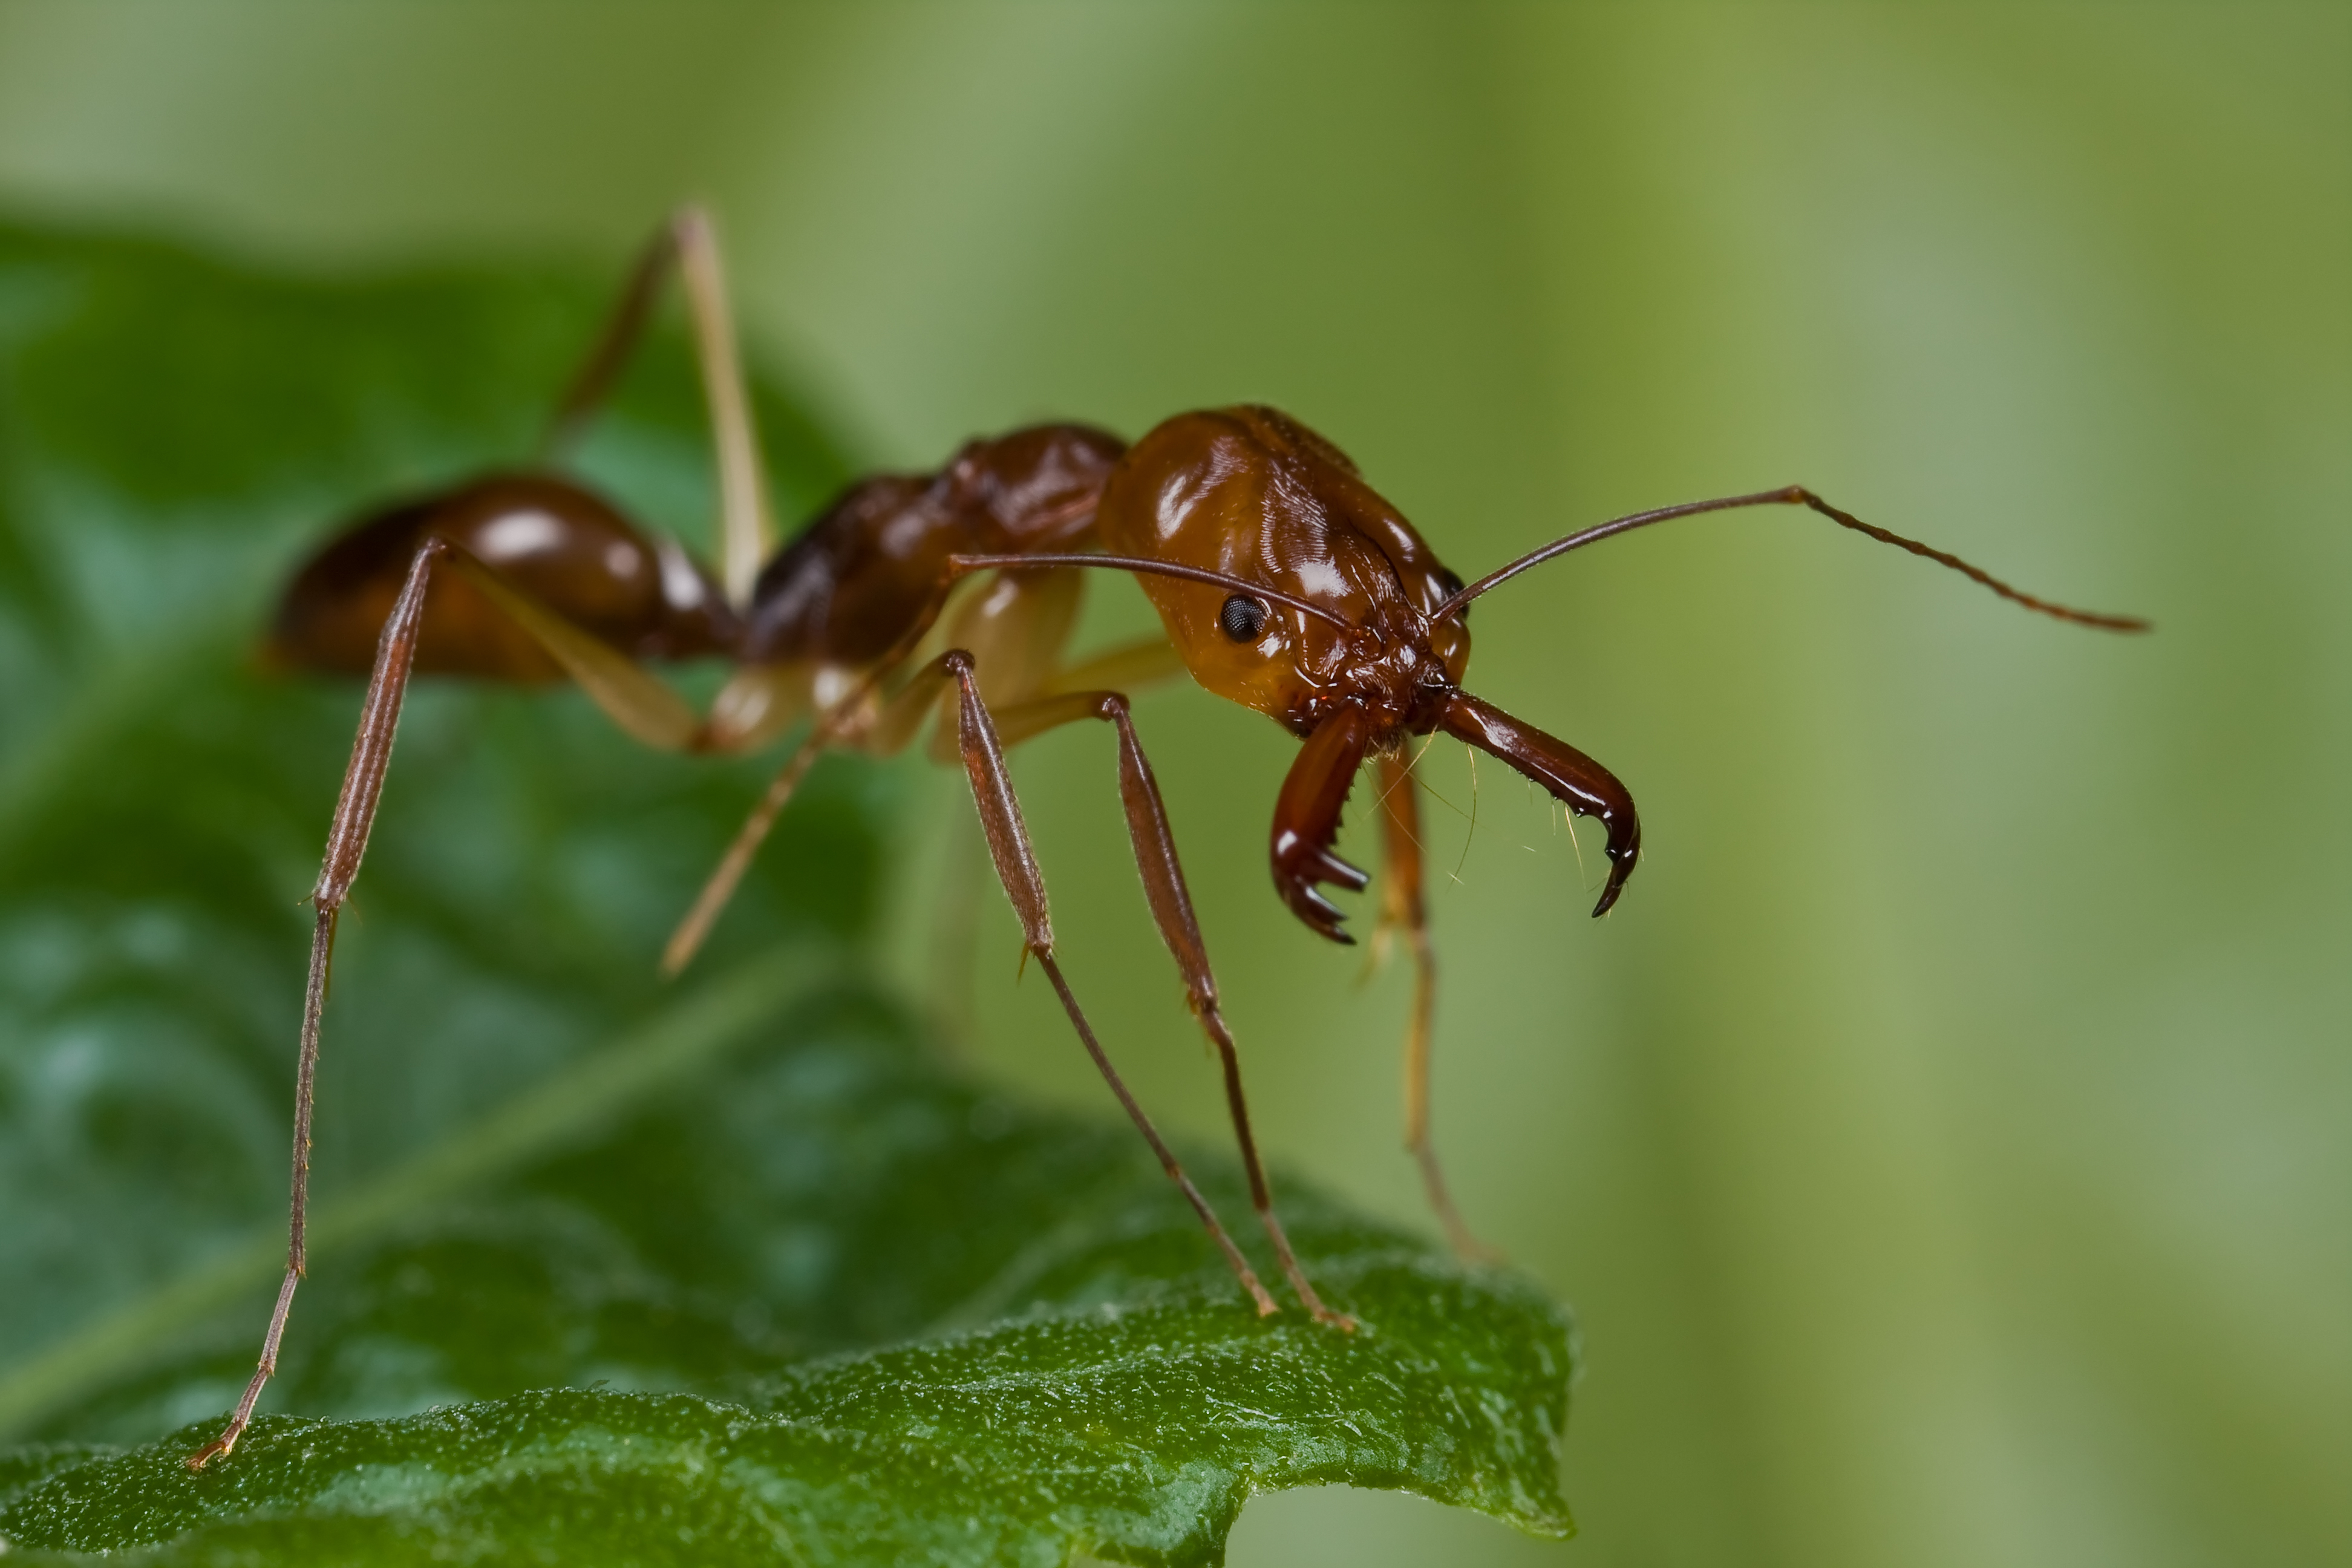 Boxing' Ants Can Trade Over 40 Blows a Second - D-brief